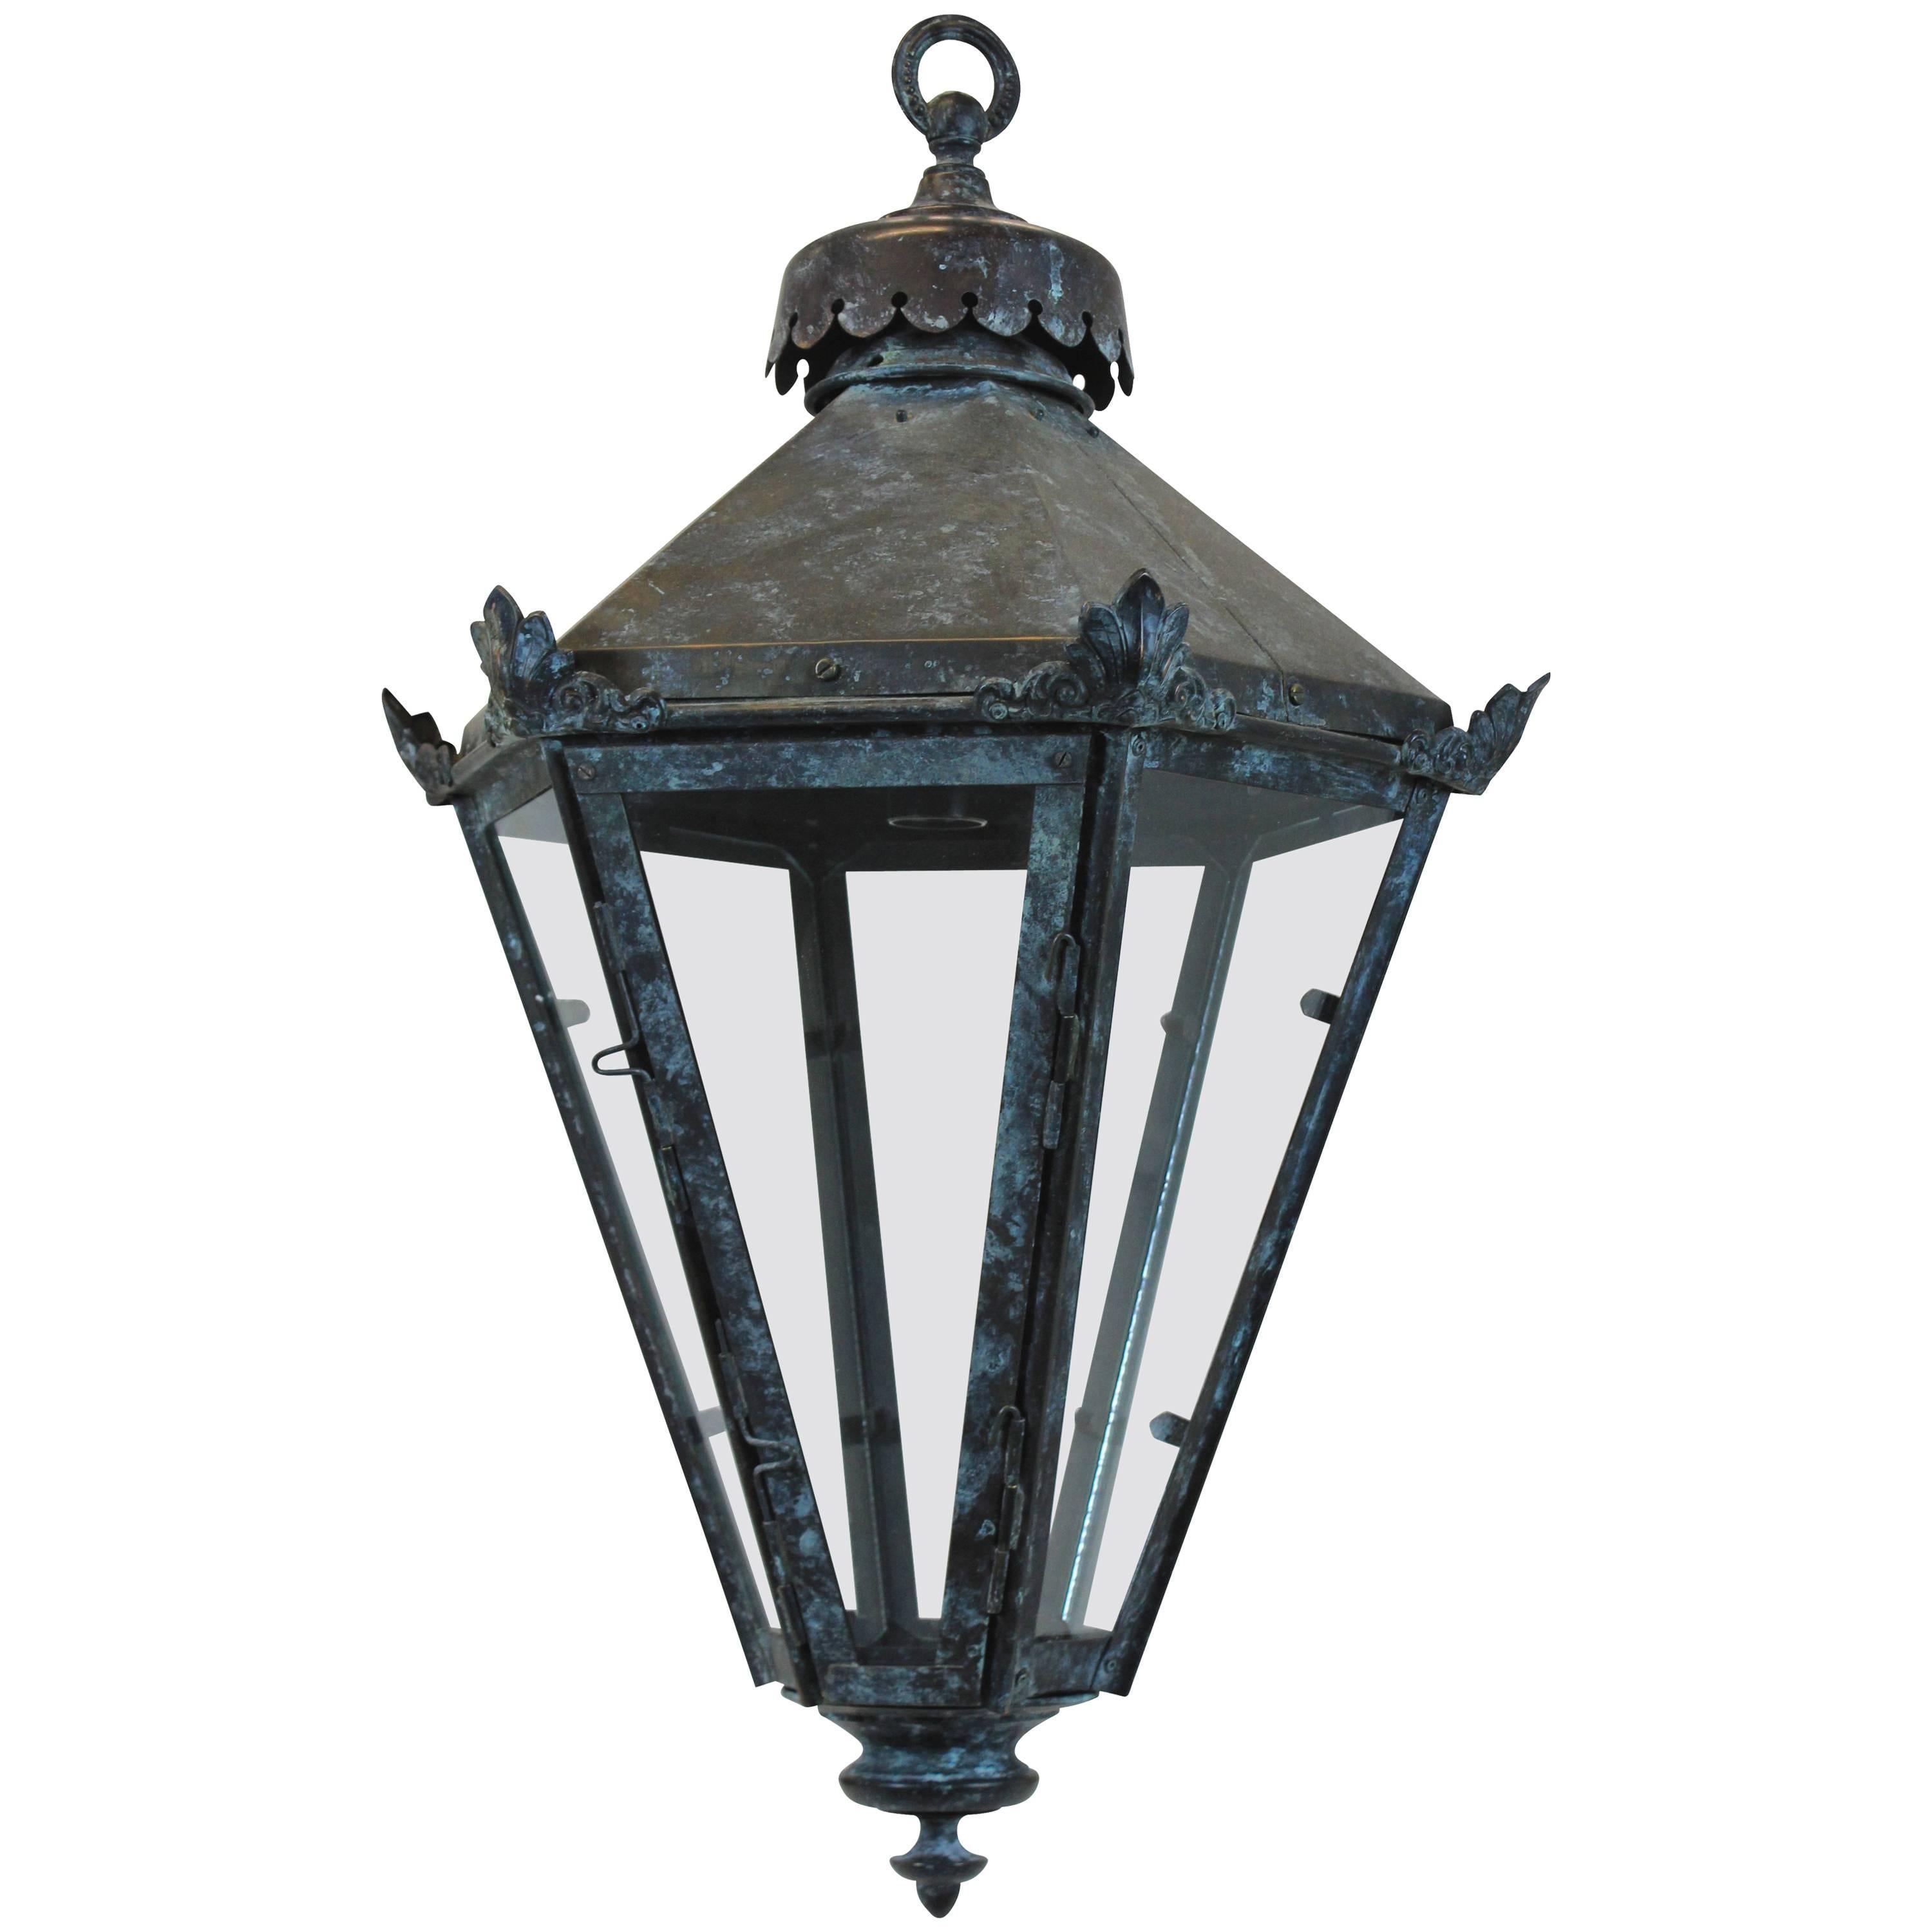 An English tapering copper lantern with good patina and covered glazed panels.

Subjected to VAT.